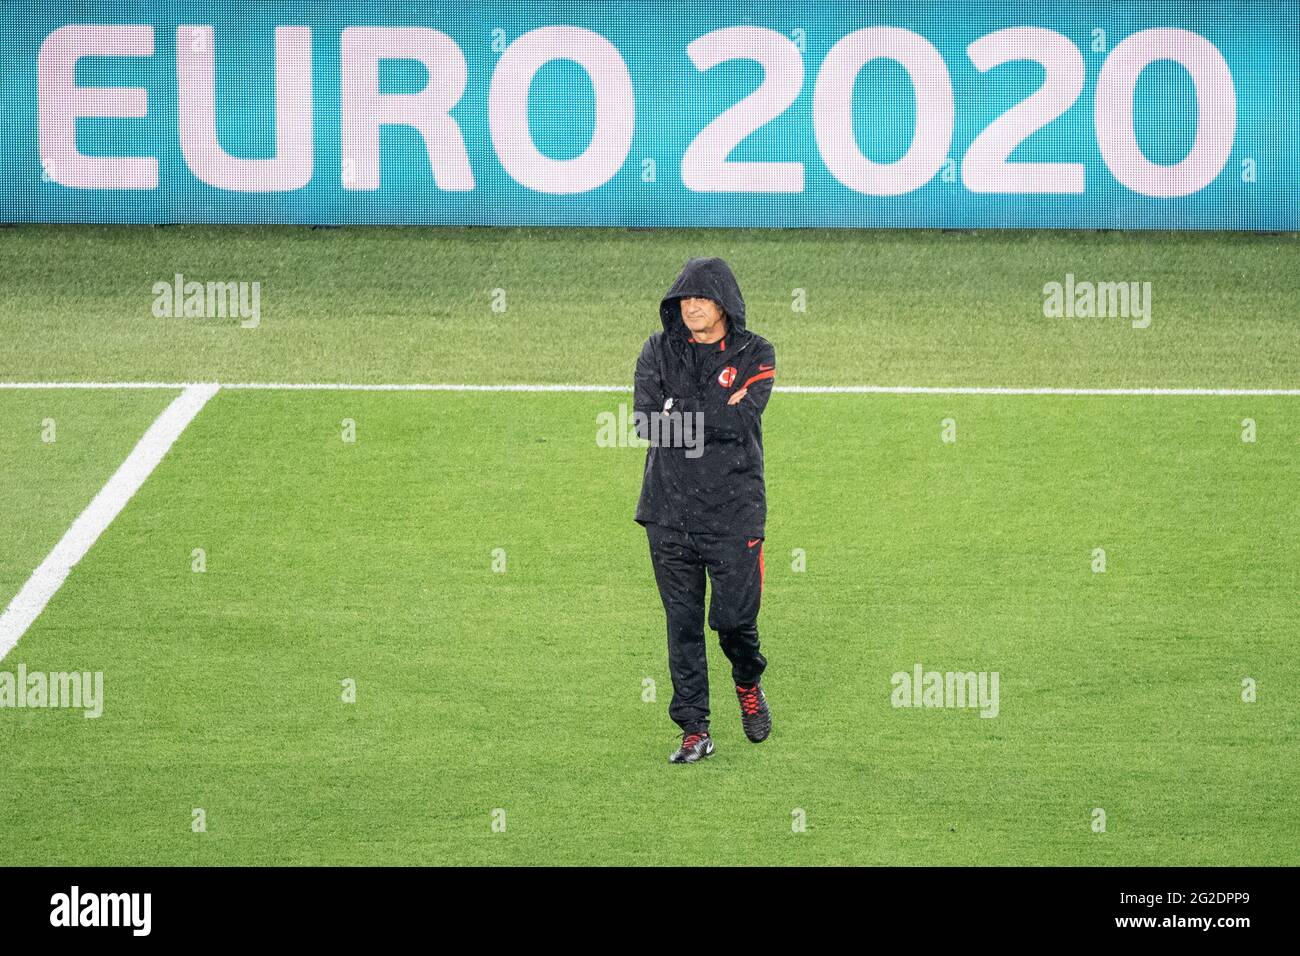 Rom, Italy. 10th June, 2021. Football: European Championship, Turkey national team, training at the Olympic Stadium in Rome. Coach Senol Günes of Turkey is watching the training session and has pulled his hood deep into his face in the rain. In the background, the words 'EURO 2020' can be seen on a digital board. Credit: Matthias Balk/dpa/Alamy Live News Stock Photo